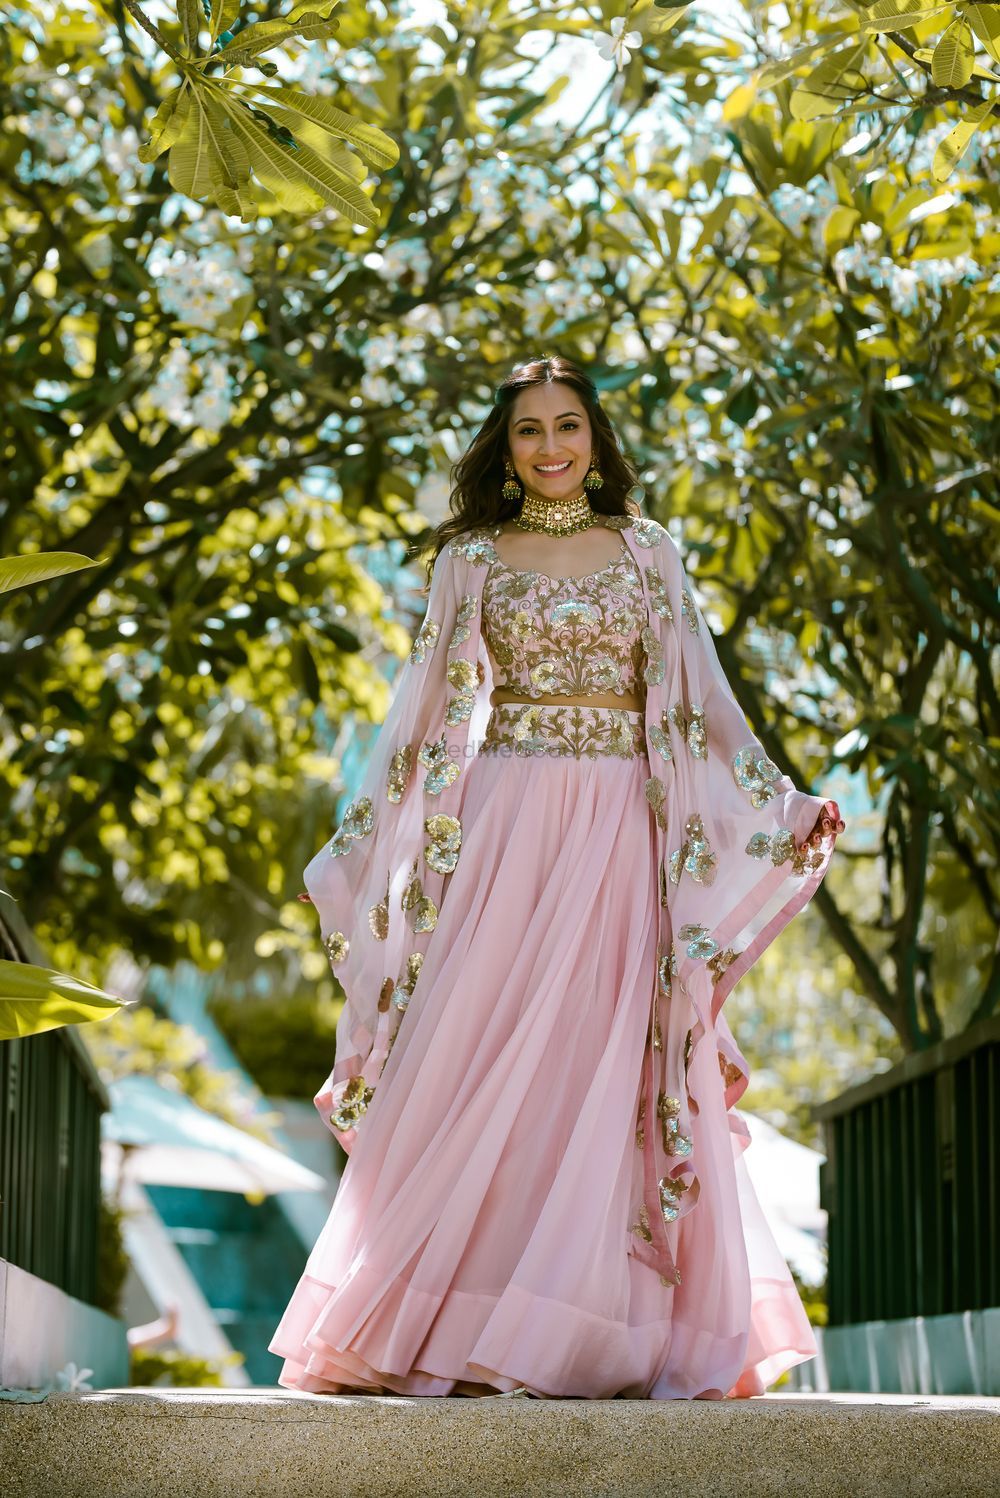 The Best Mehendi Outfits Of 2018: WMG Real Bride Edition! | WedMeGood